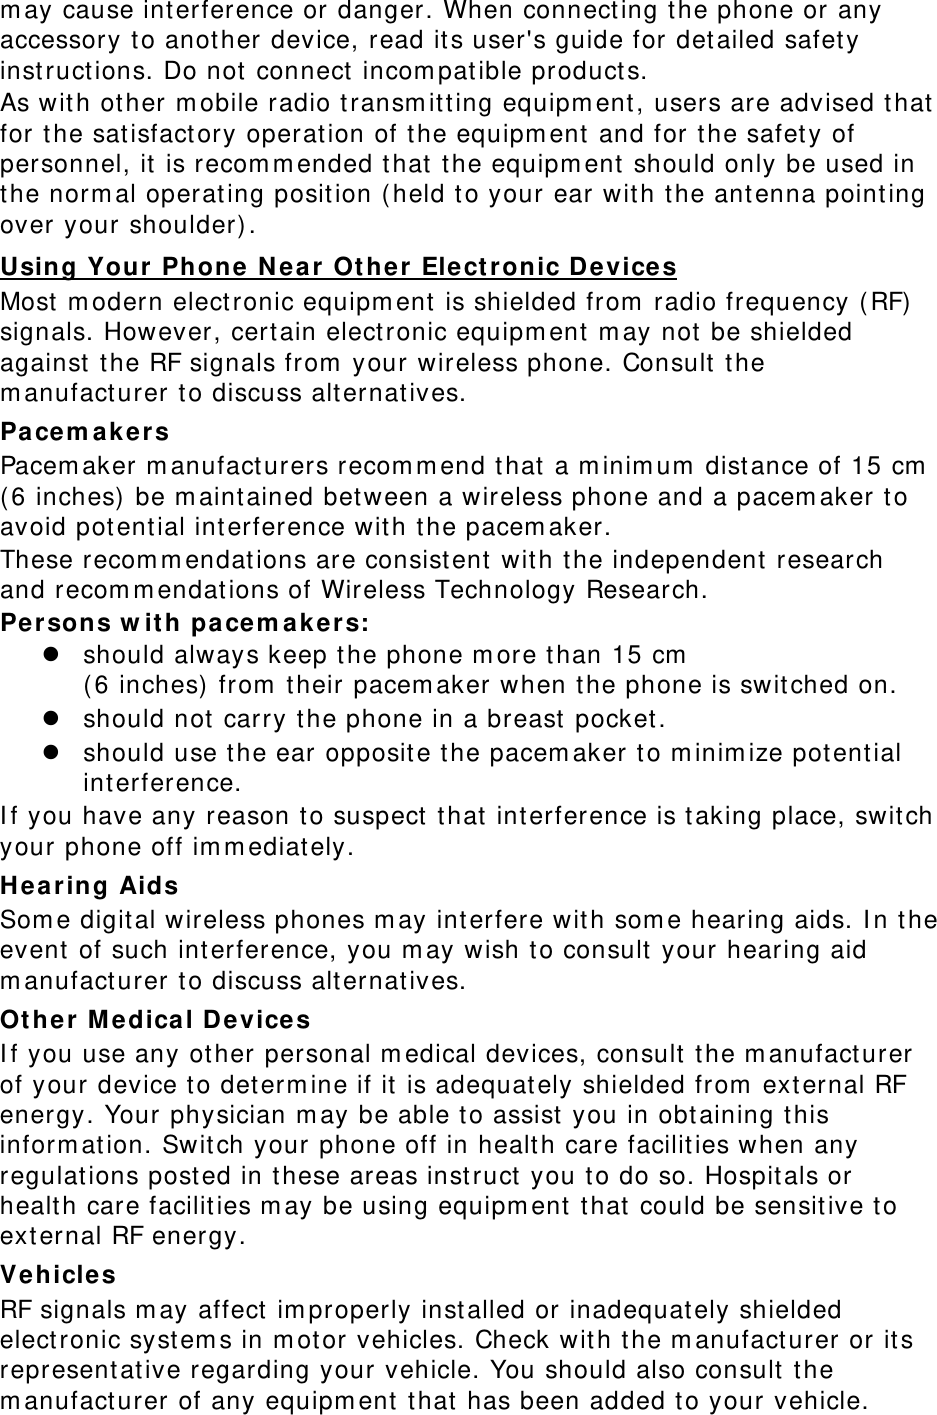 m ay cause int erference or danger. When connecting t he phone or any accessory t o anot her device, read its user&apos;s guide for detailed safety inst ruct ions. Do not connect  incom pat ible product s. As wit h ot her m obile radio t ransm itt ing equipm ent, users are advised t hat  for the sat isfact ory operation of t he equipm ent and for the safety of personnel, it  is recom m ended t hat  the equipm ent  should only be used in the norm al operating posit ion ( held t o your ear wit h t he ant enna point ing over your shoulder) . Using Your Phone N e a r  Ot her Elect ronic Devices Most  m odern elect ronic equipm ent  is shielded from  radio frequency (RF)  signals. However, certain electronic equipm ent  m ay not  be shielded against  the RF signals from  your wireless phone. Consult t he m anufact urer t o discuss alt ernat ives. Pa cem akers Pacem aker m anufact urers recom m end t hat  a m inim um  dist ance of 15 cm  ( 6 inches)  be m aintained between a wireless phone and a pacem aker to avoid pot ential interference with the pacem aker. These recom m endations are consist ent wit h t he independent  research and recom m endat ions of Wireless Technology Research. Pe r son s w it h pace m akers:  should always keep the phone m ore than 15 cm    ( 6 inches)  from  t heir pacem aker when the phone is swit ched on.  should not  carry the phone in a breast  pocket .  should use the ear opposit e t he pacem aker t o m inim ize pot ent ial int erference. I f you have any reason t o suspect  t hat  int erference is t aking place, swit ch your phone off im m ediat ely. Hearing Aids Som e digit al wireless phones m ay int erfere wit h som e hearing aids. I n the event of such int erference, you m ay wish t o consult  your hearing aid m anufact urer t o discuss alt ernat ives. Ot her M e dica l Devices I f you use any ot her personal m edical devices, consult  the m anufacturer of your device t o determ ine if it  is adequat ely shielded from  external RF energy. Your physician m ay be able t o assist  you in obt aining t his inform ation. Switch your phone off in healt h care facilit ies when any regulat ions post ed in t hese areas inst ruct  you t o do so. Hospit als or healt h care facilit ies m ay be using equipm ent that  could be sensit ive t o external RF energy. Vehicles RF signals m ay affect  im properly inst alled or inadequat ely shielded elect ronic syst em s in m otor vehicles. Check wit h t he m anufact urer or it s representat ive regarding your vehicle. You should also consult t he m anufact urer of any equipm ent that  has been added t o your vehicle. 